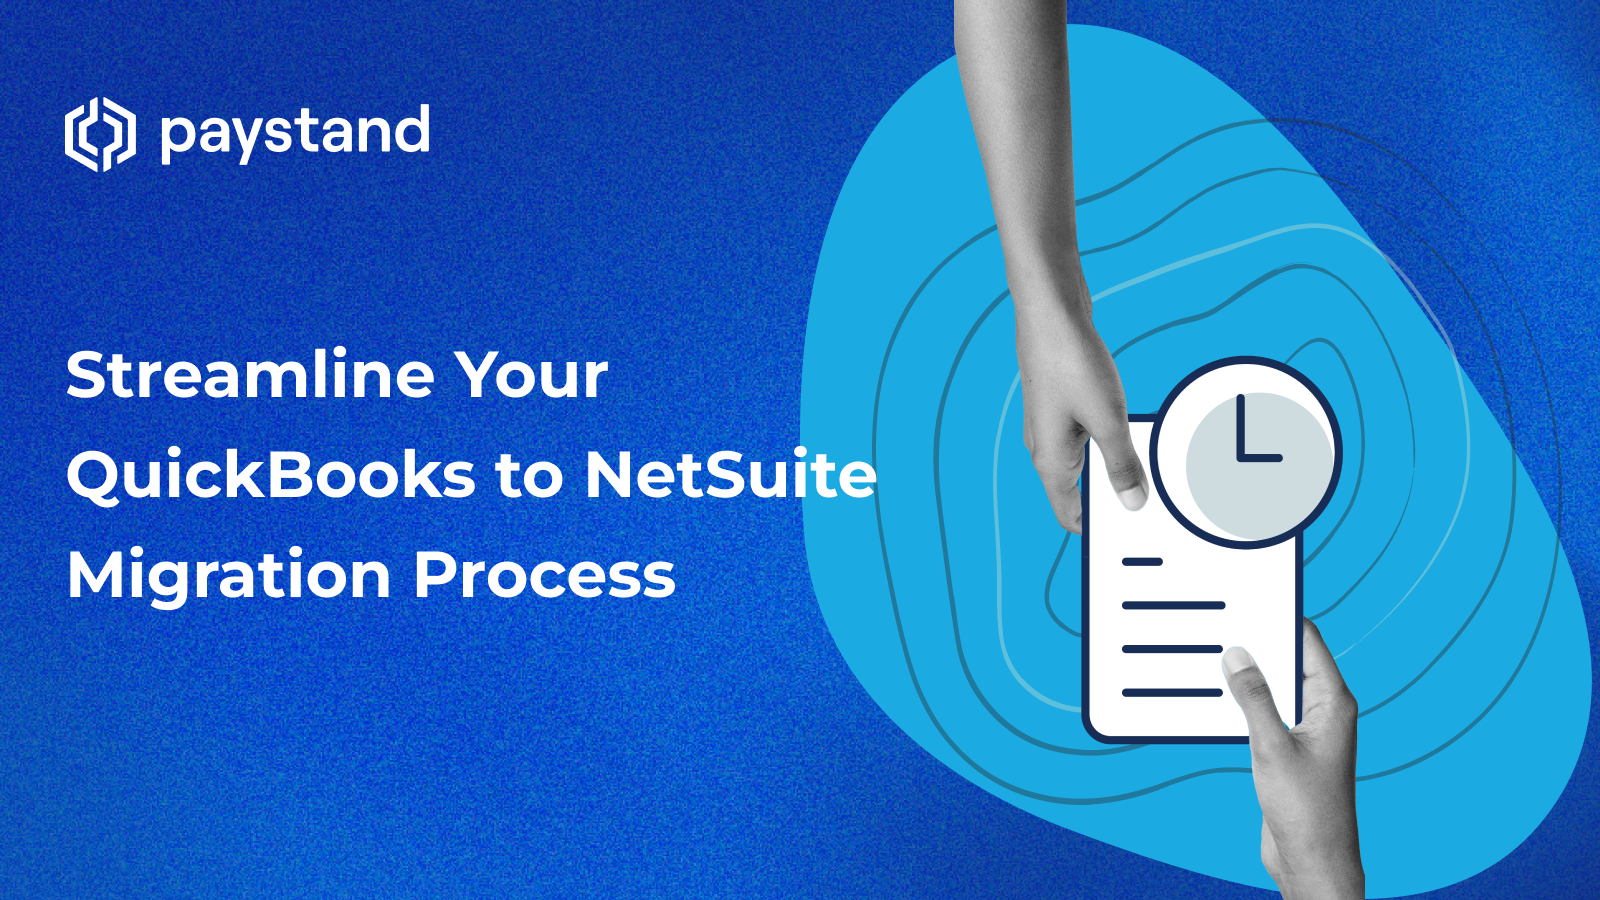 Streamline Your QuickBooks to NetSuite Migration Process